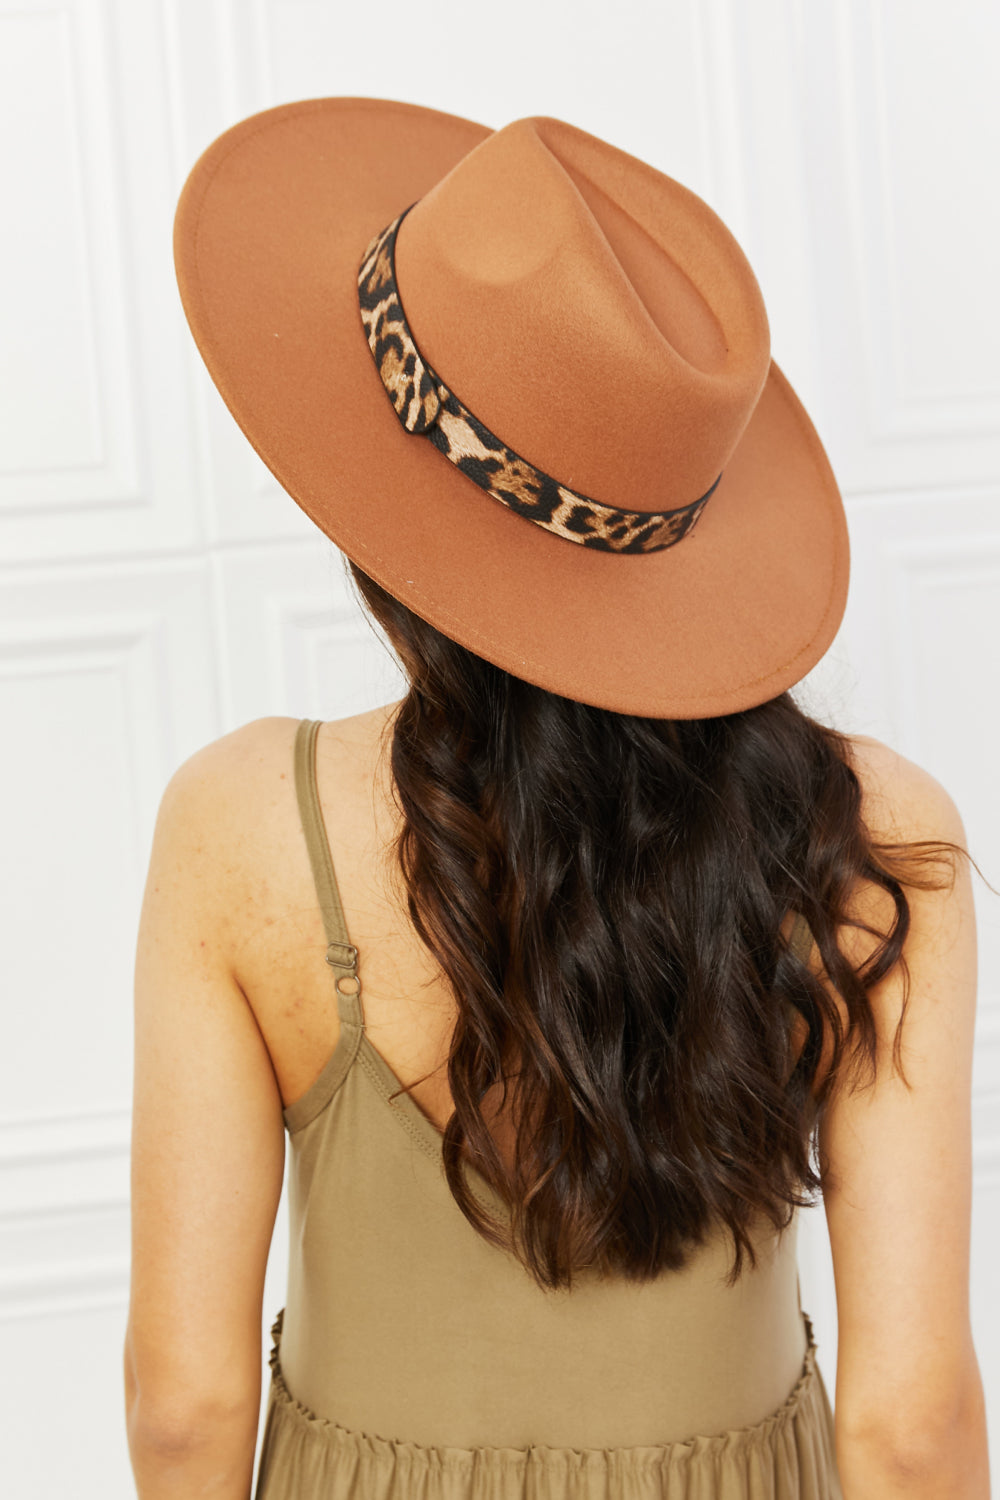 Fame In The Wild Leopard Detail Fedora Hat The Stout Steer